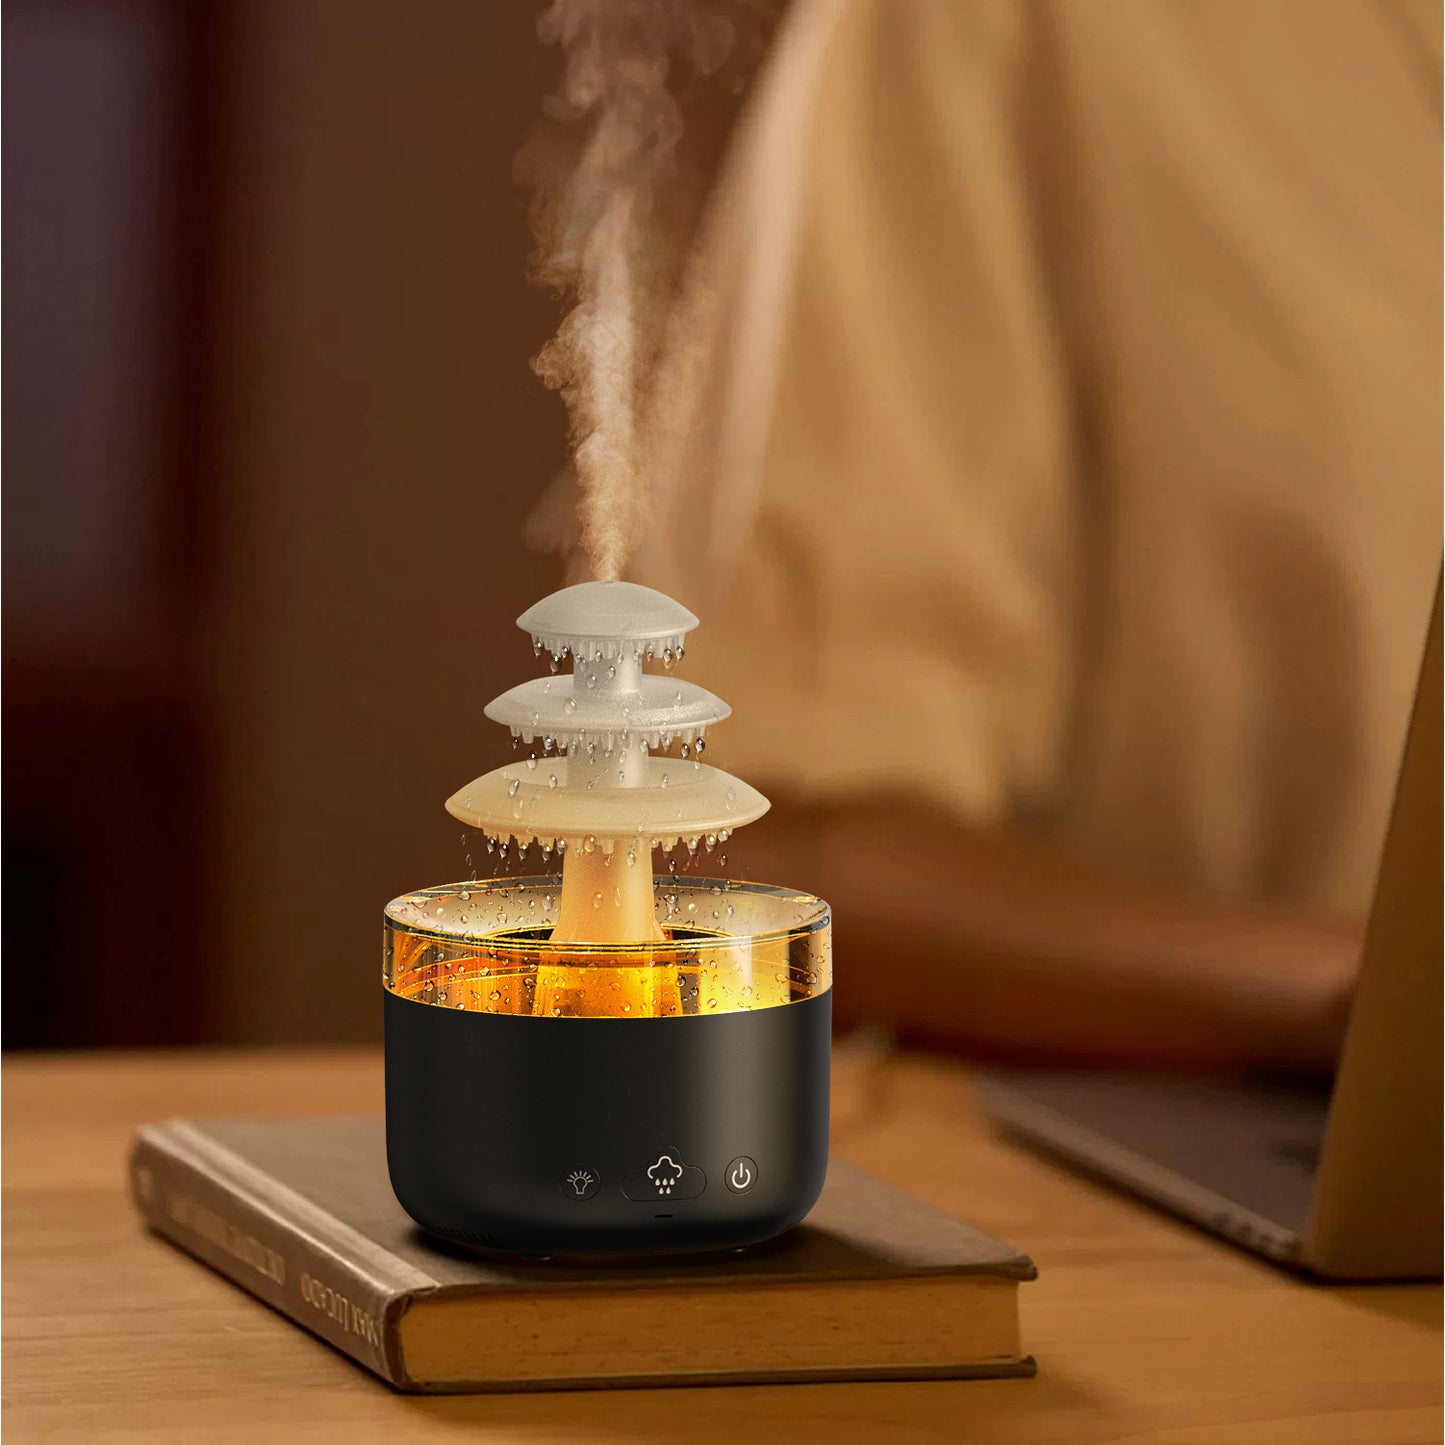 Mute Mist Air Humidifier With Colorful Light